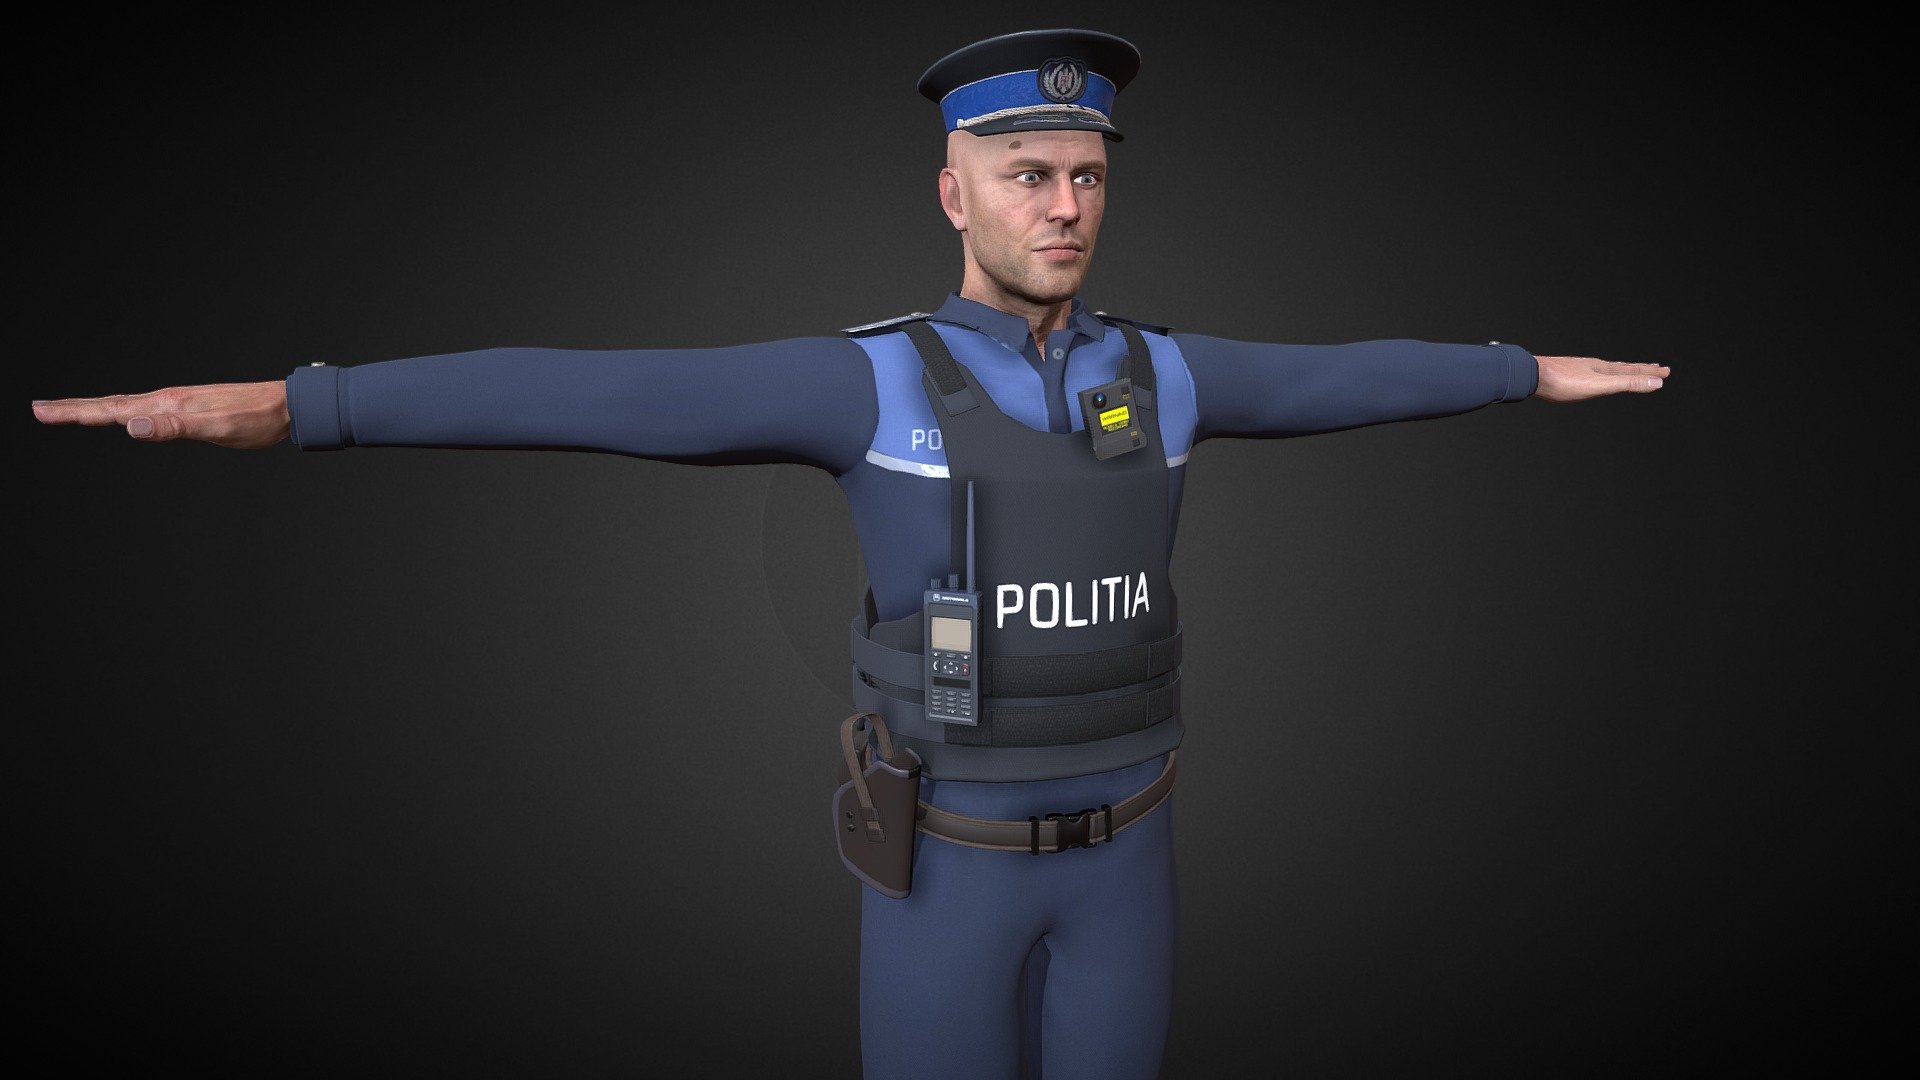 Romanian police gameready uniform made in blender and textured in substance painter. It is ready to be used on rigged characters 3d model